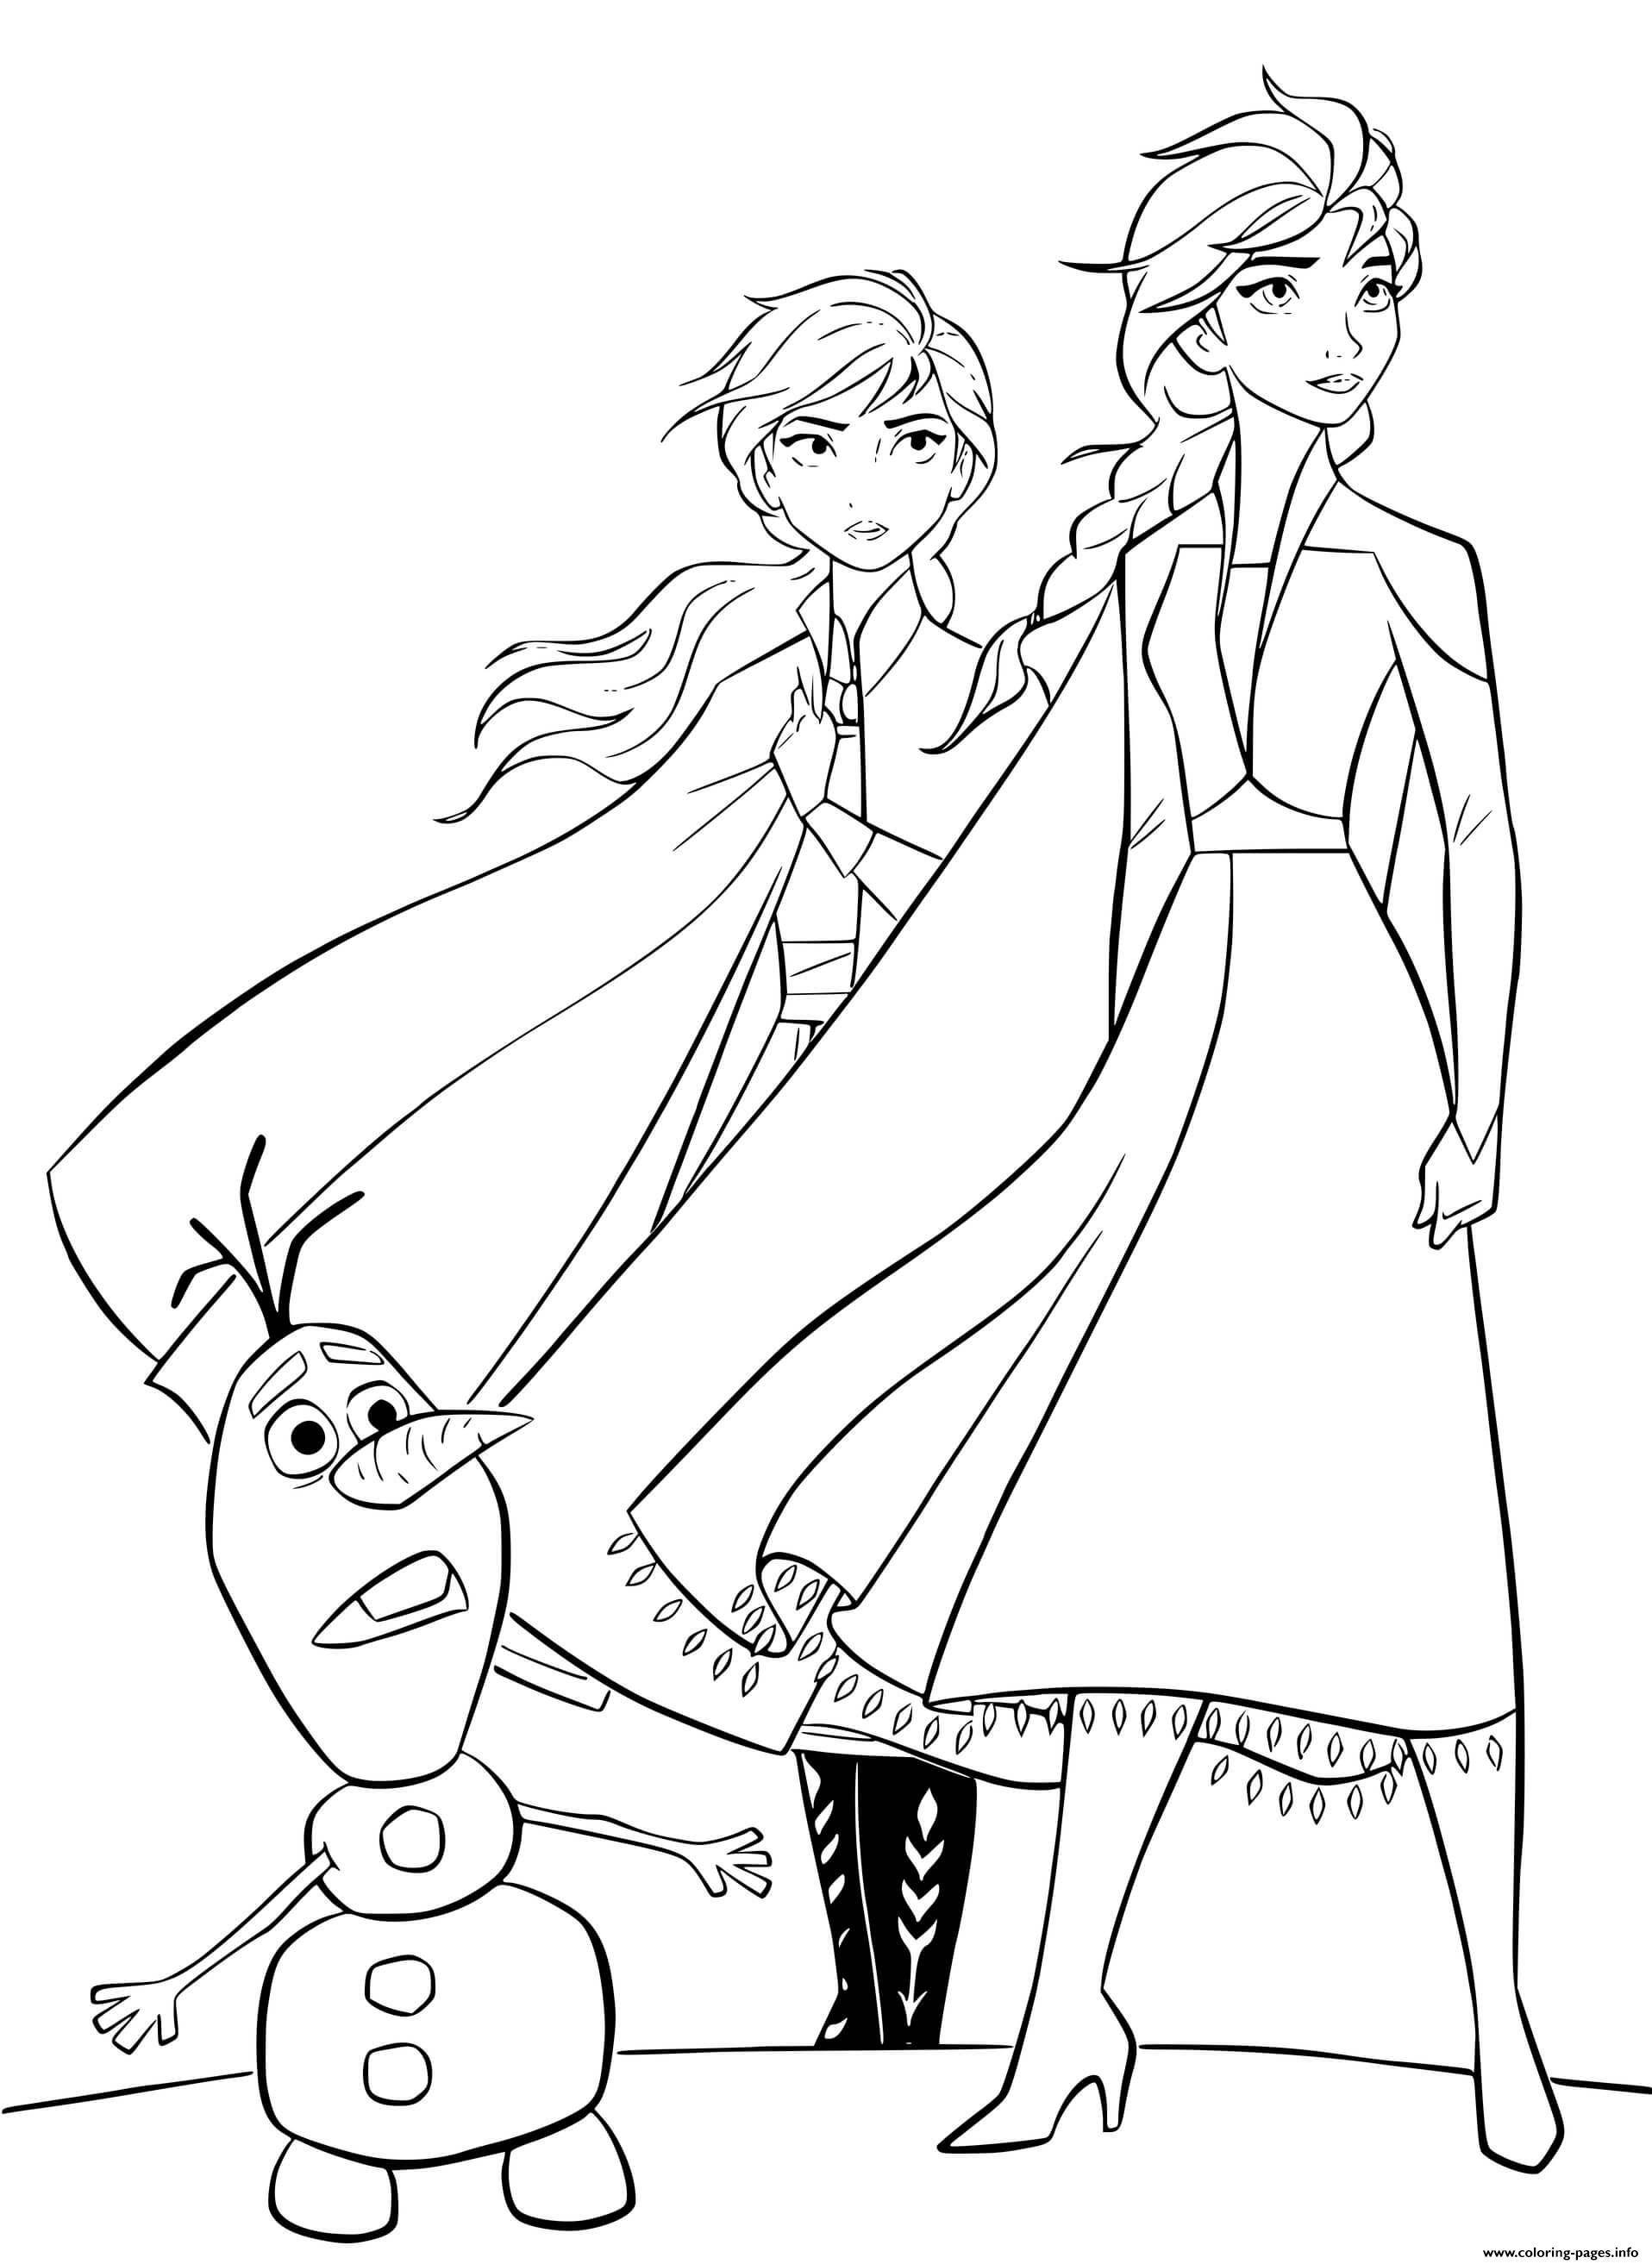 Elsa And Anna Free Printable Coloring Pages